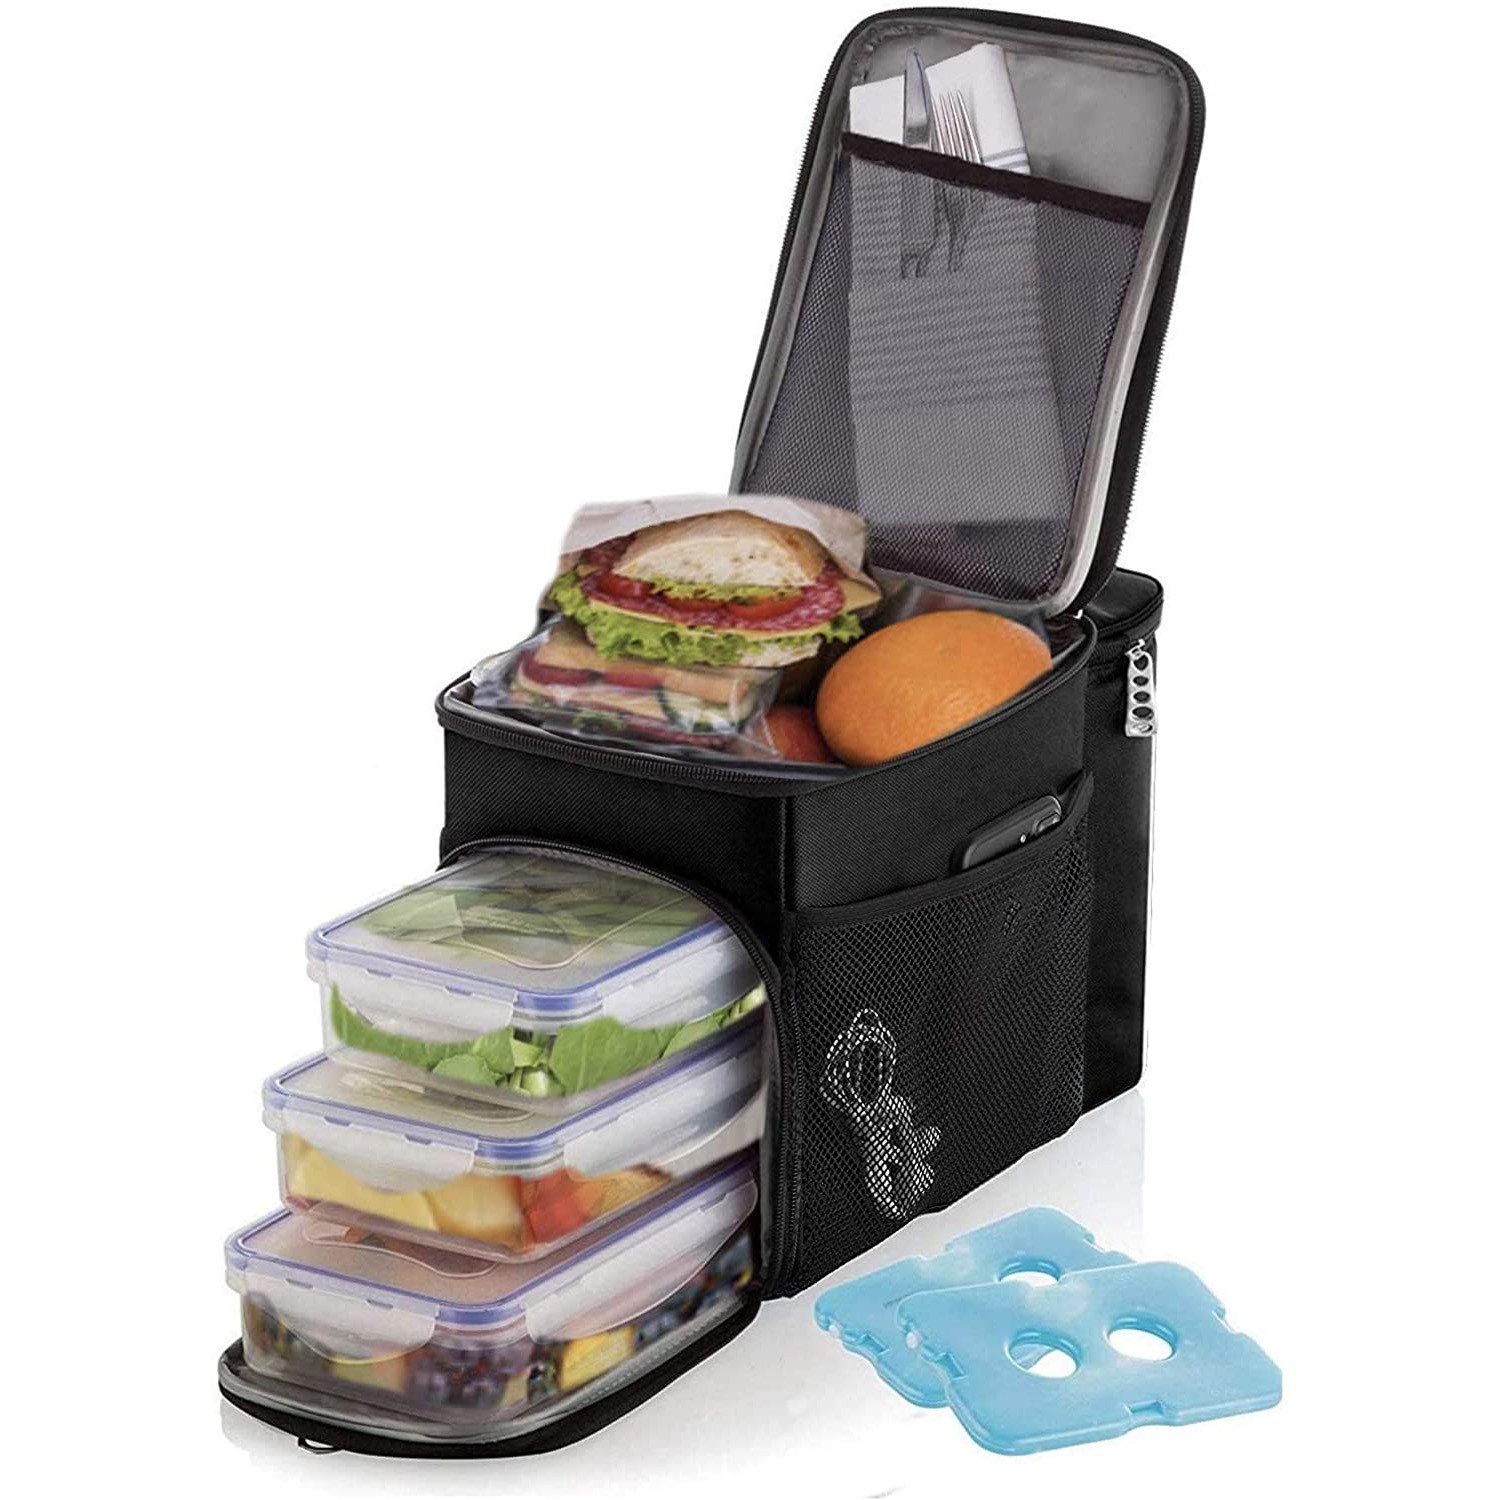 10 Best Meal Prep Containers for On the Go